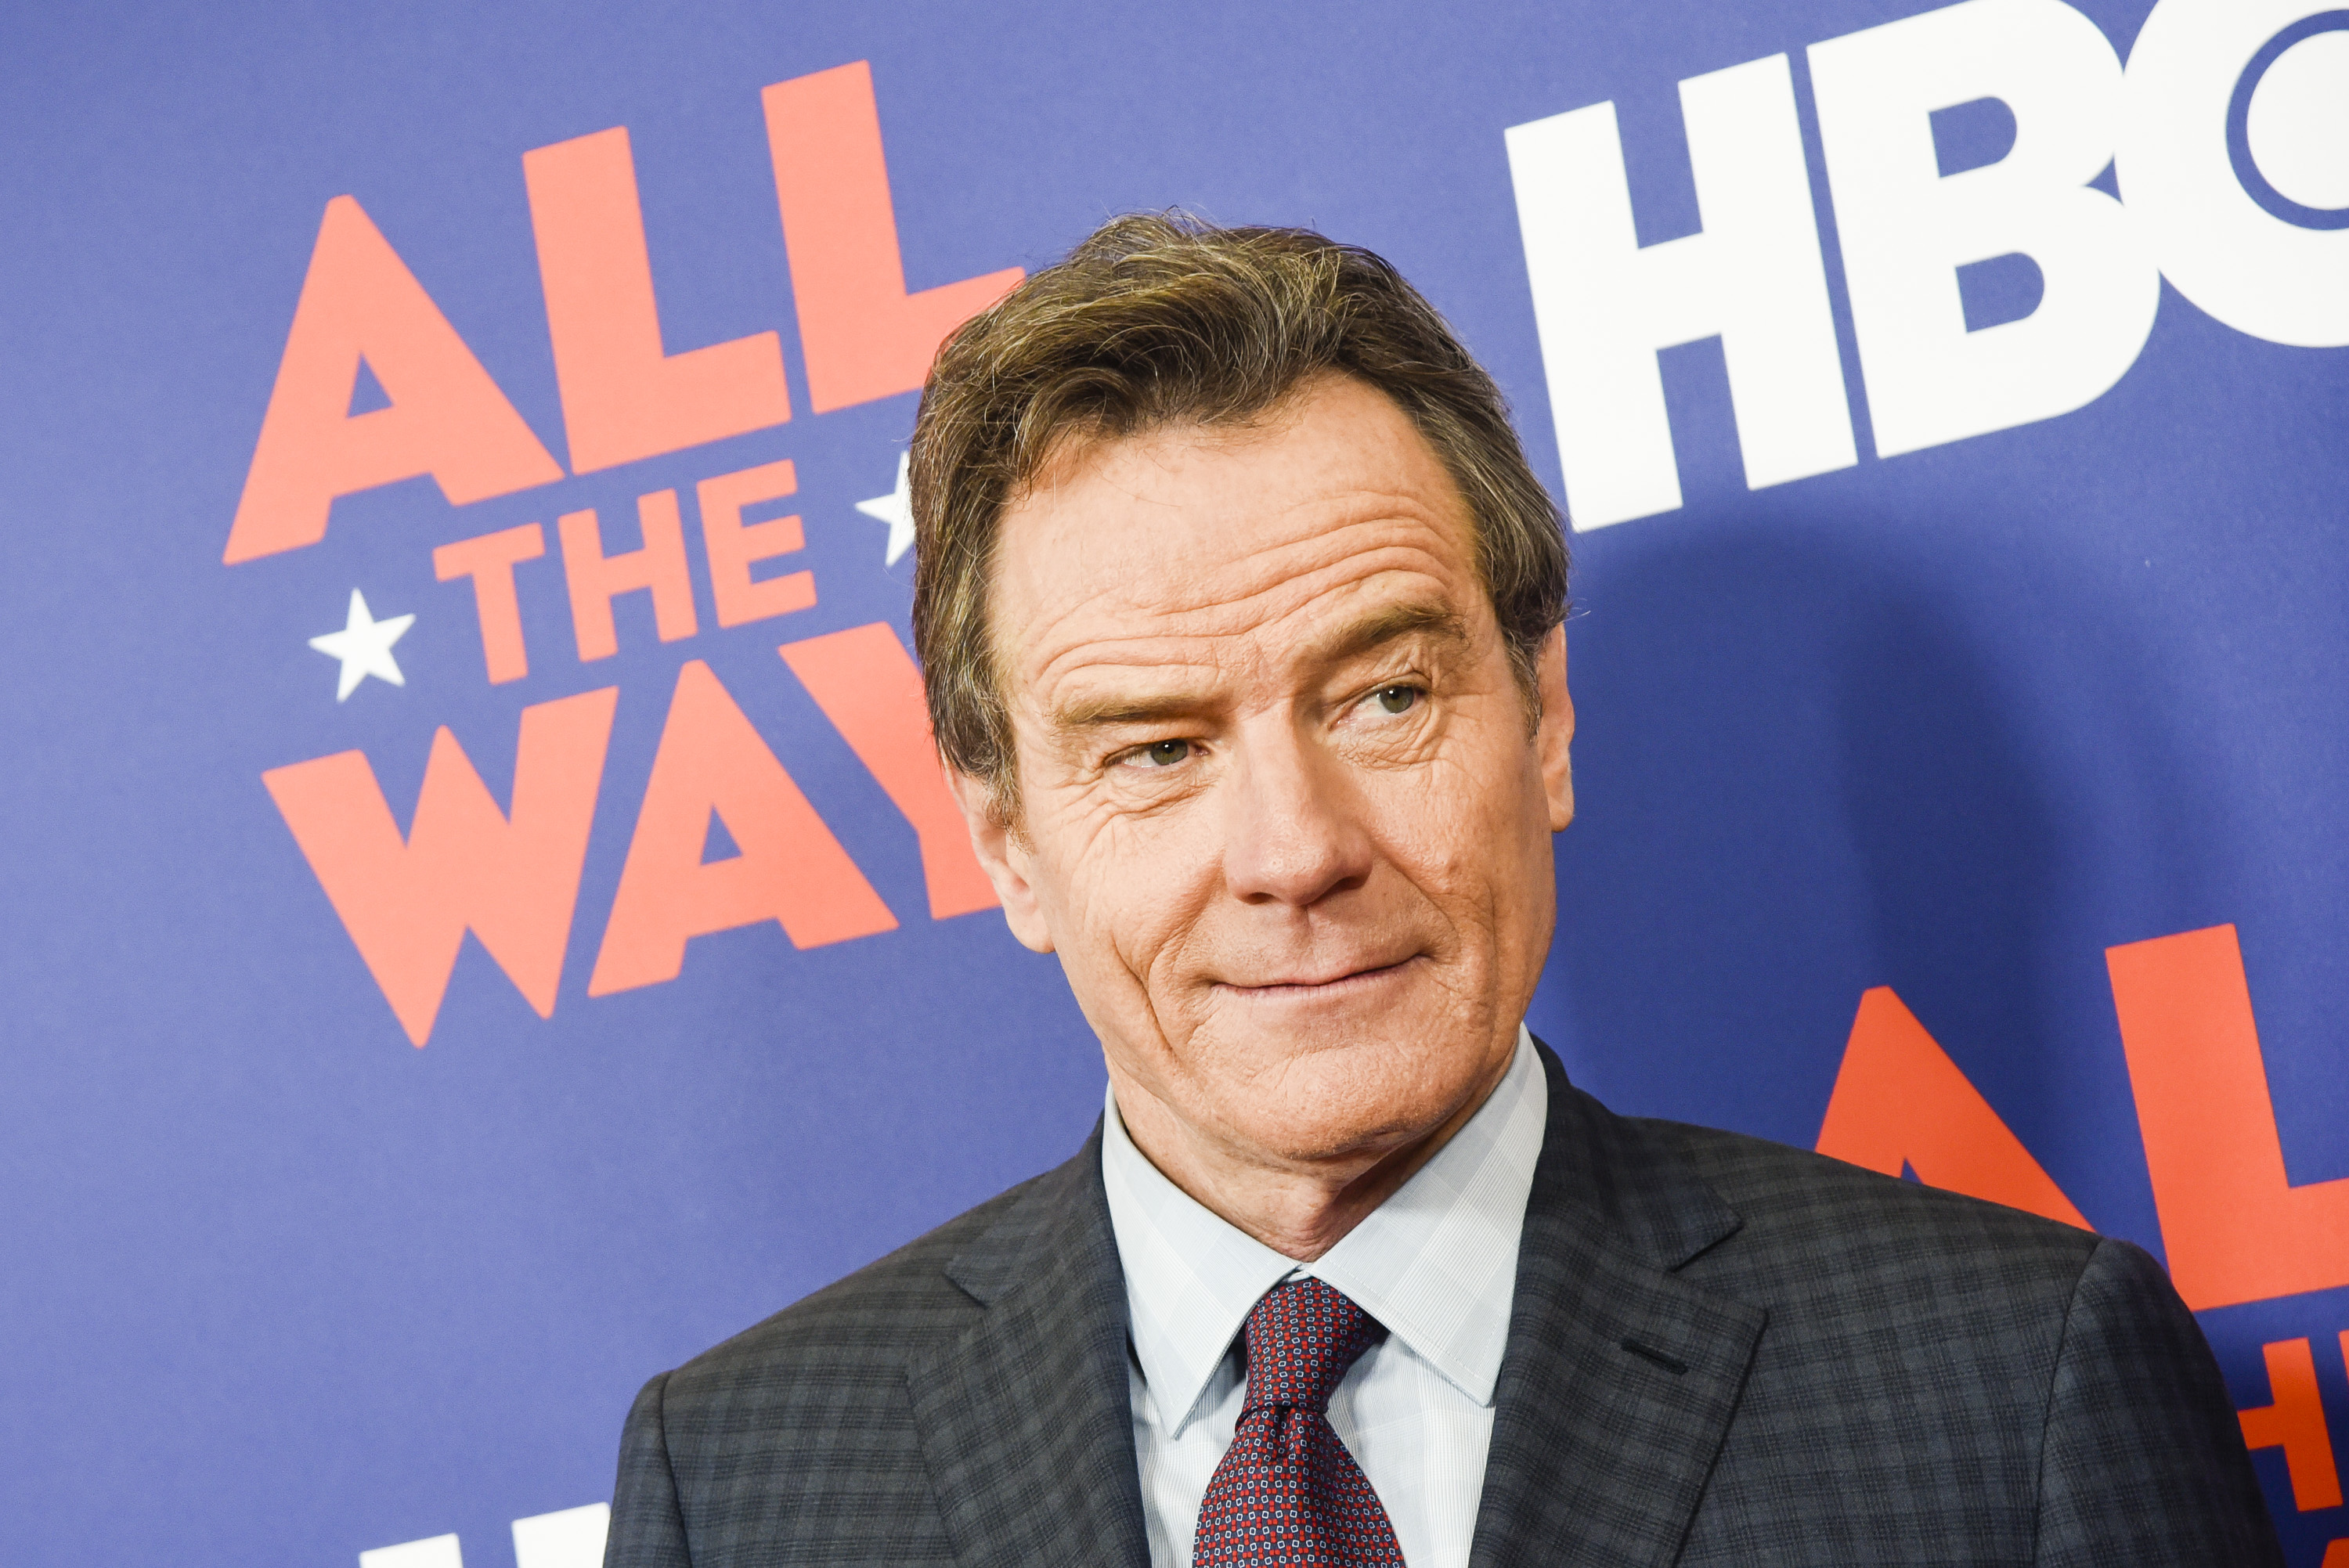 Actor Bryan Cranston poses for photographers during HBO's "All The Way" Washington, DC Screening at The National Archives in Washington, D.C., on May 16, 2016. (Kris Connor—Getty Images)